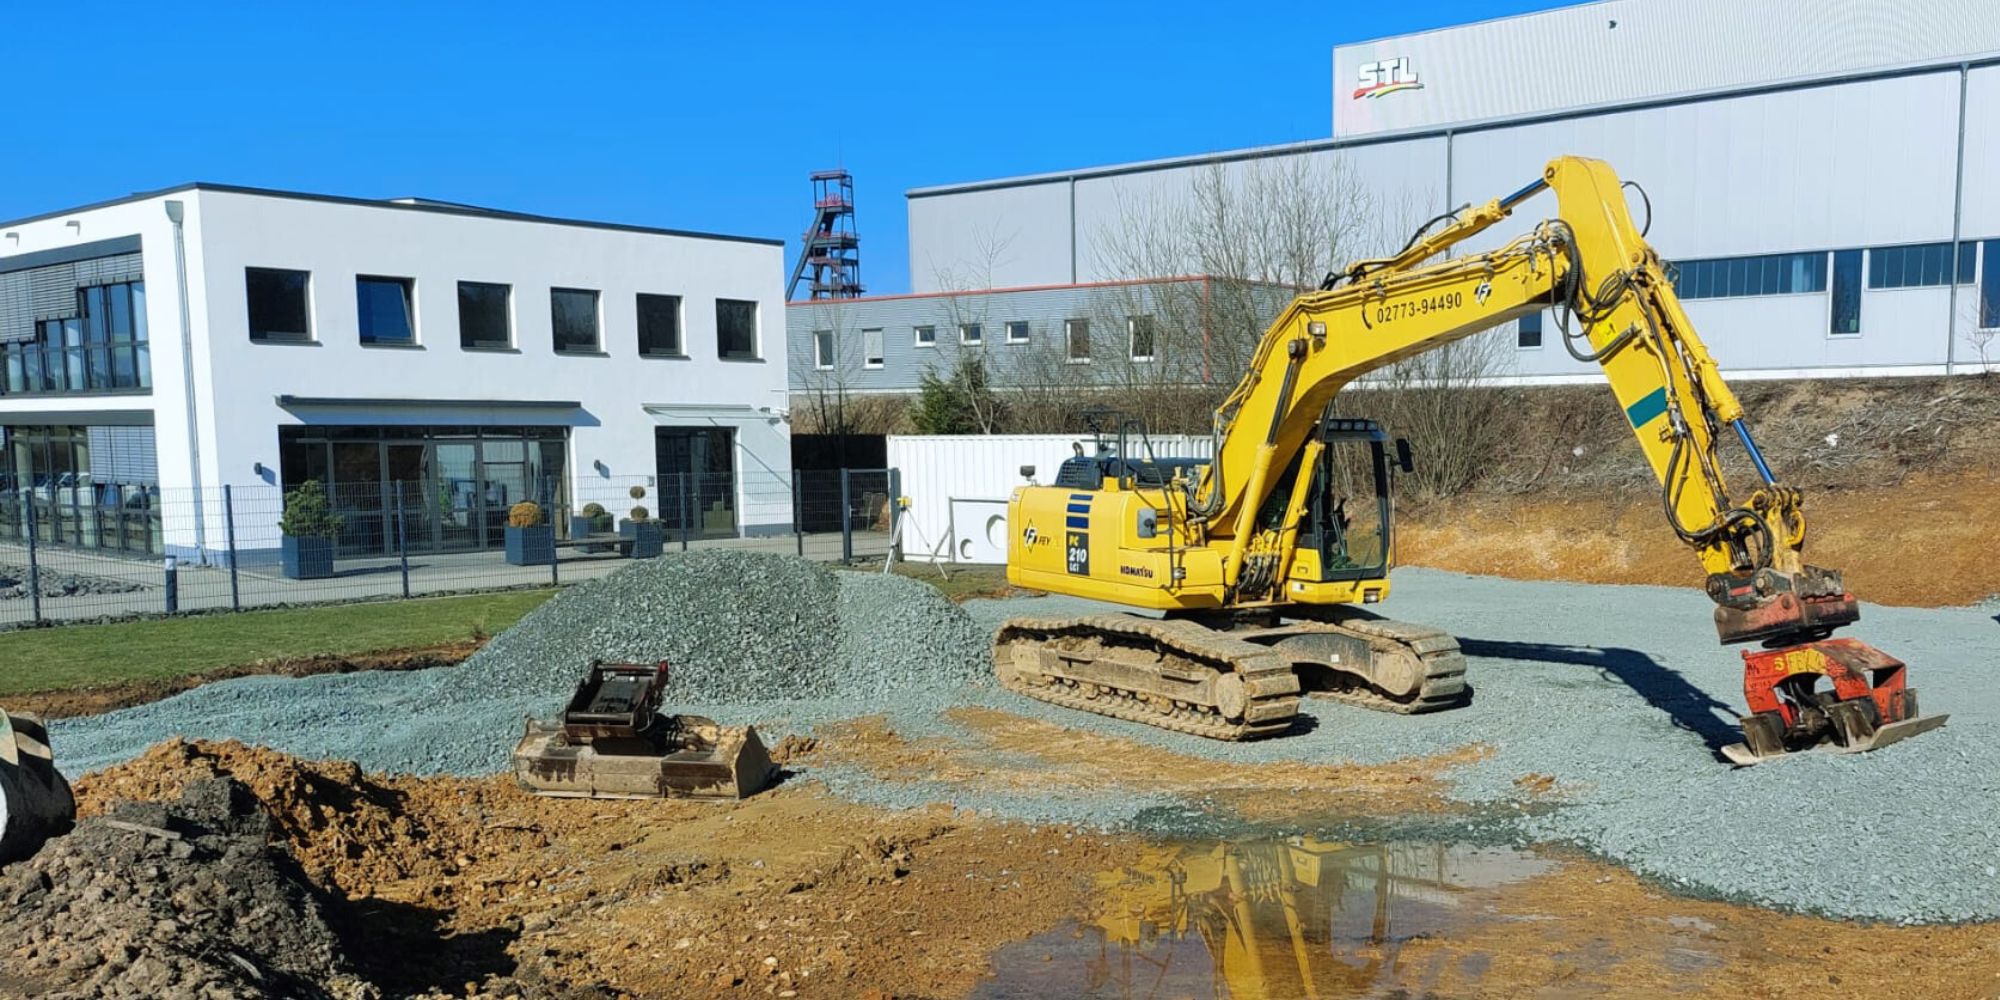 Excavator levels the ground for the construction of the Packaging Innovation Center on the Kalteiche site in Haiger, Germany